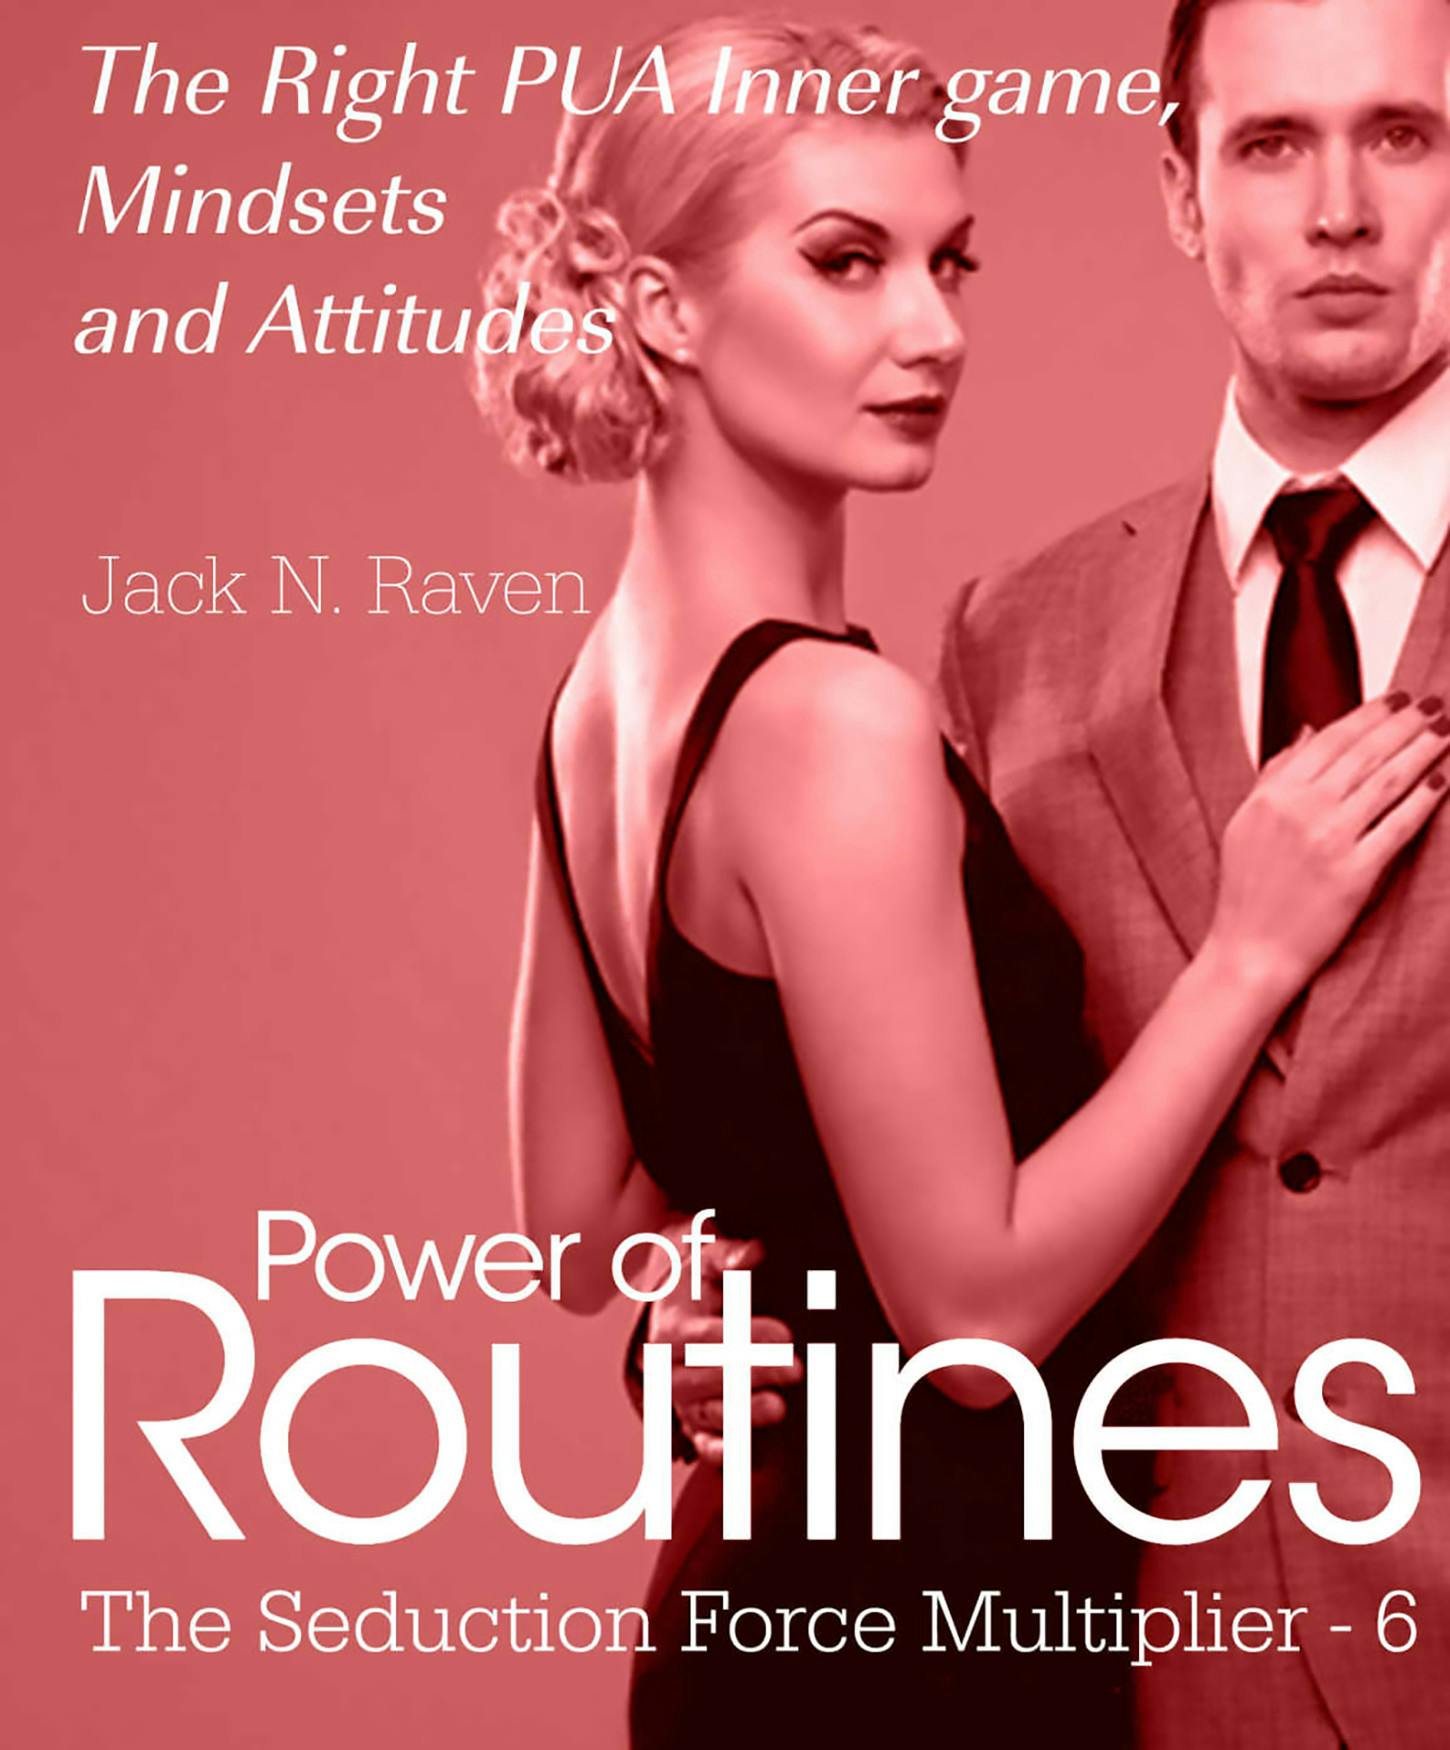 Seduction Force Multiplier 6: Power of Routines - The Right PUA Inner game , Mindsets and Attitudes! - undefined